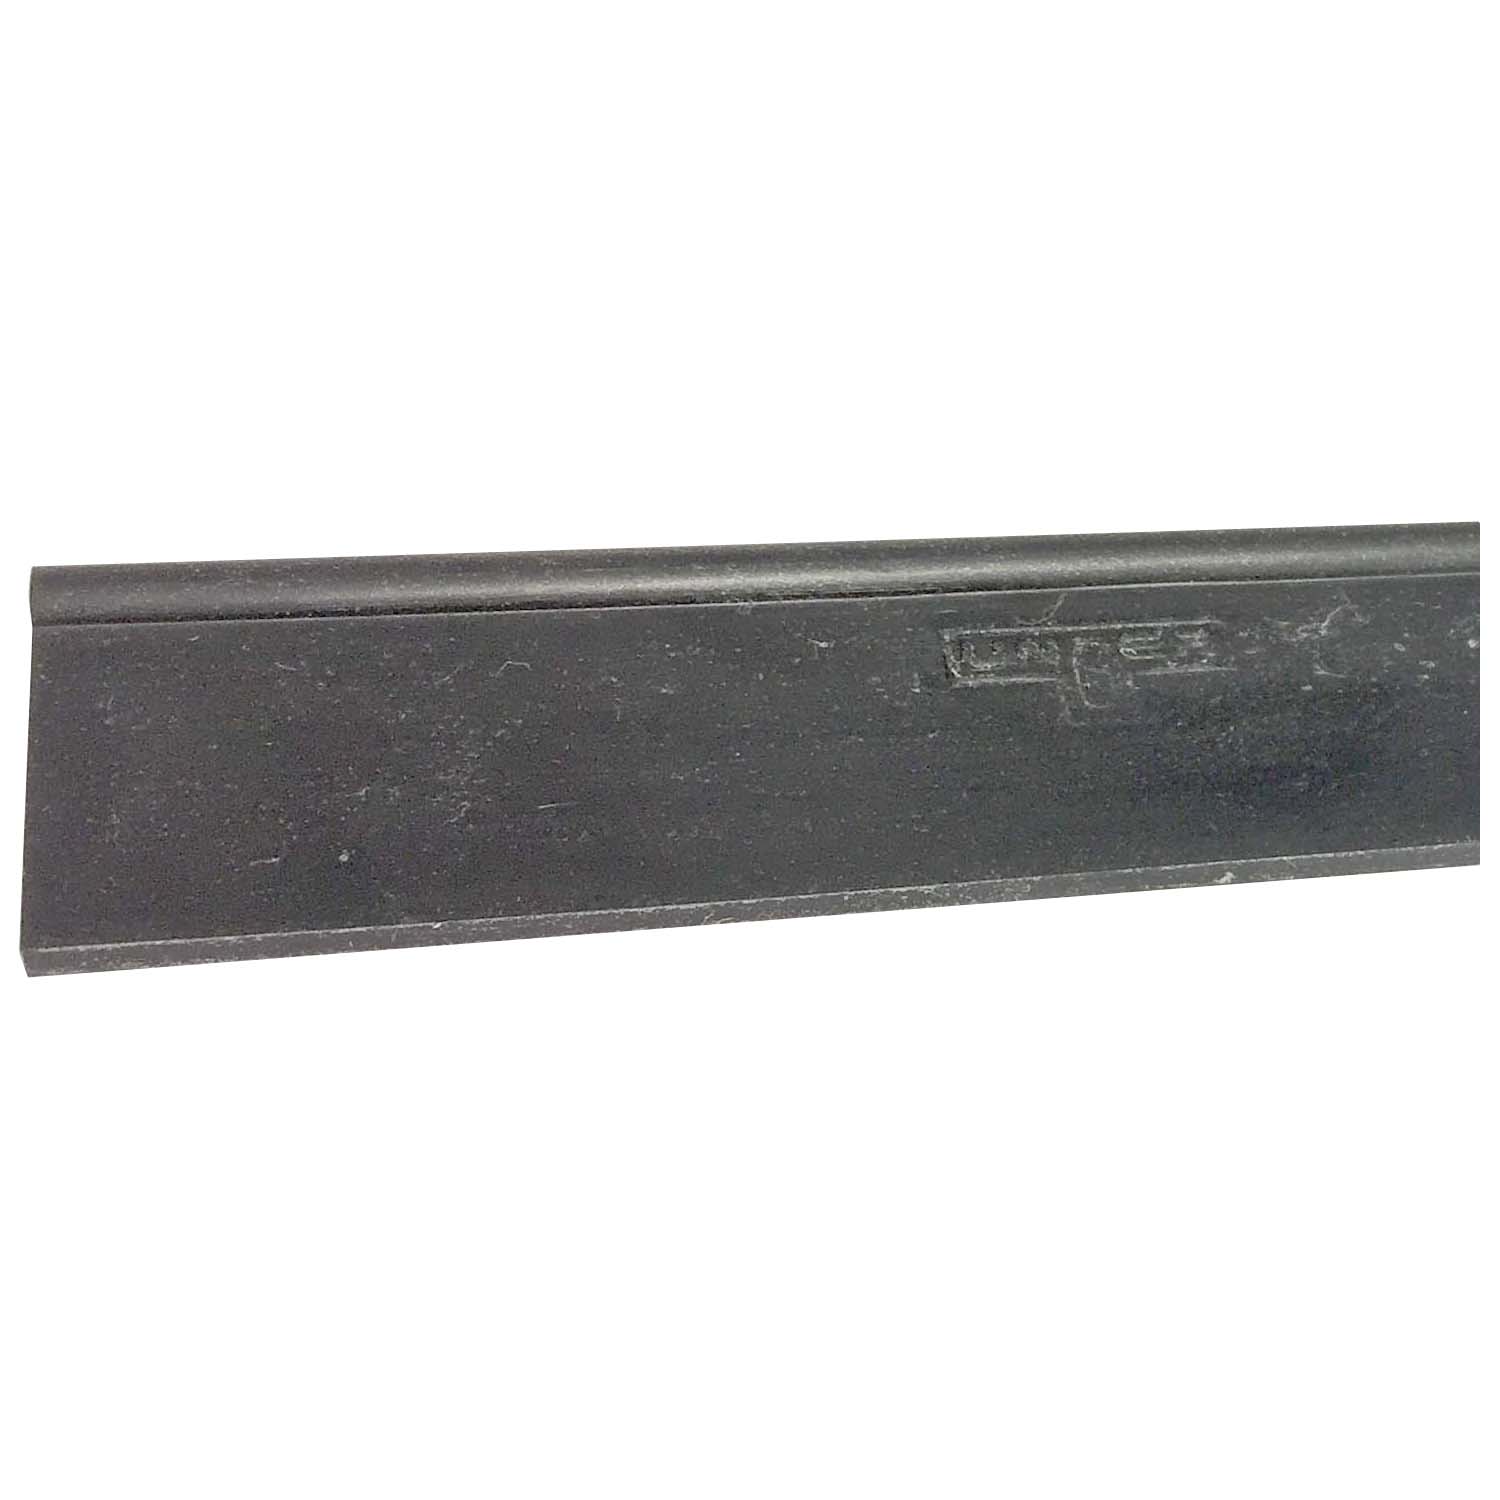 Unger-14-inch-Soft-Rubber